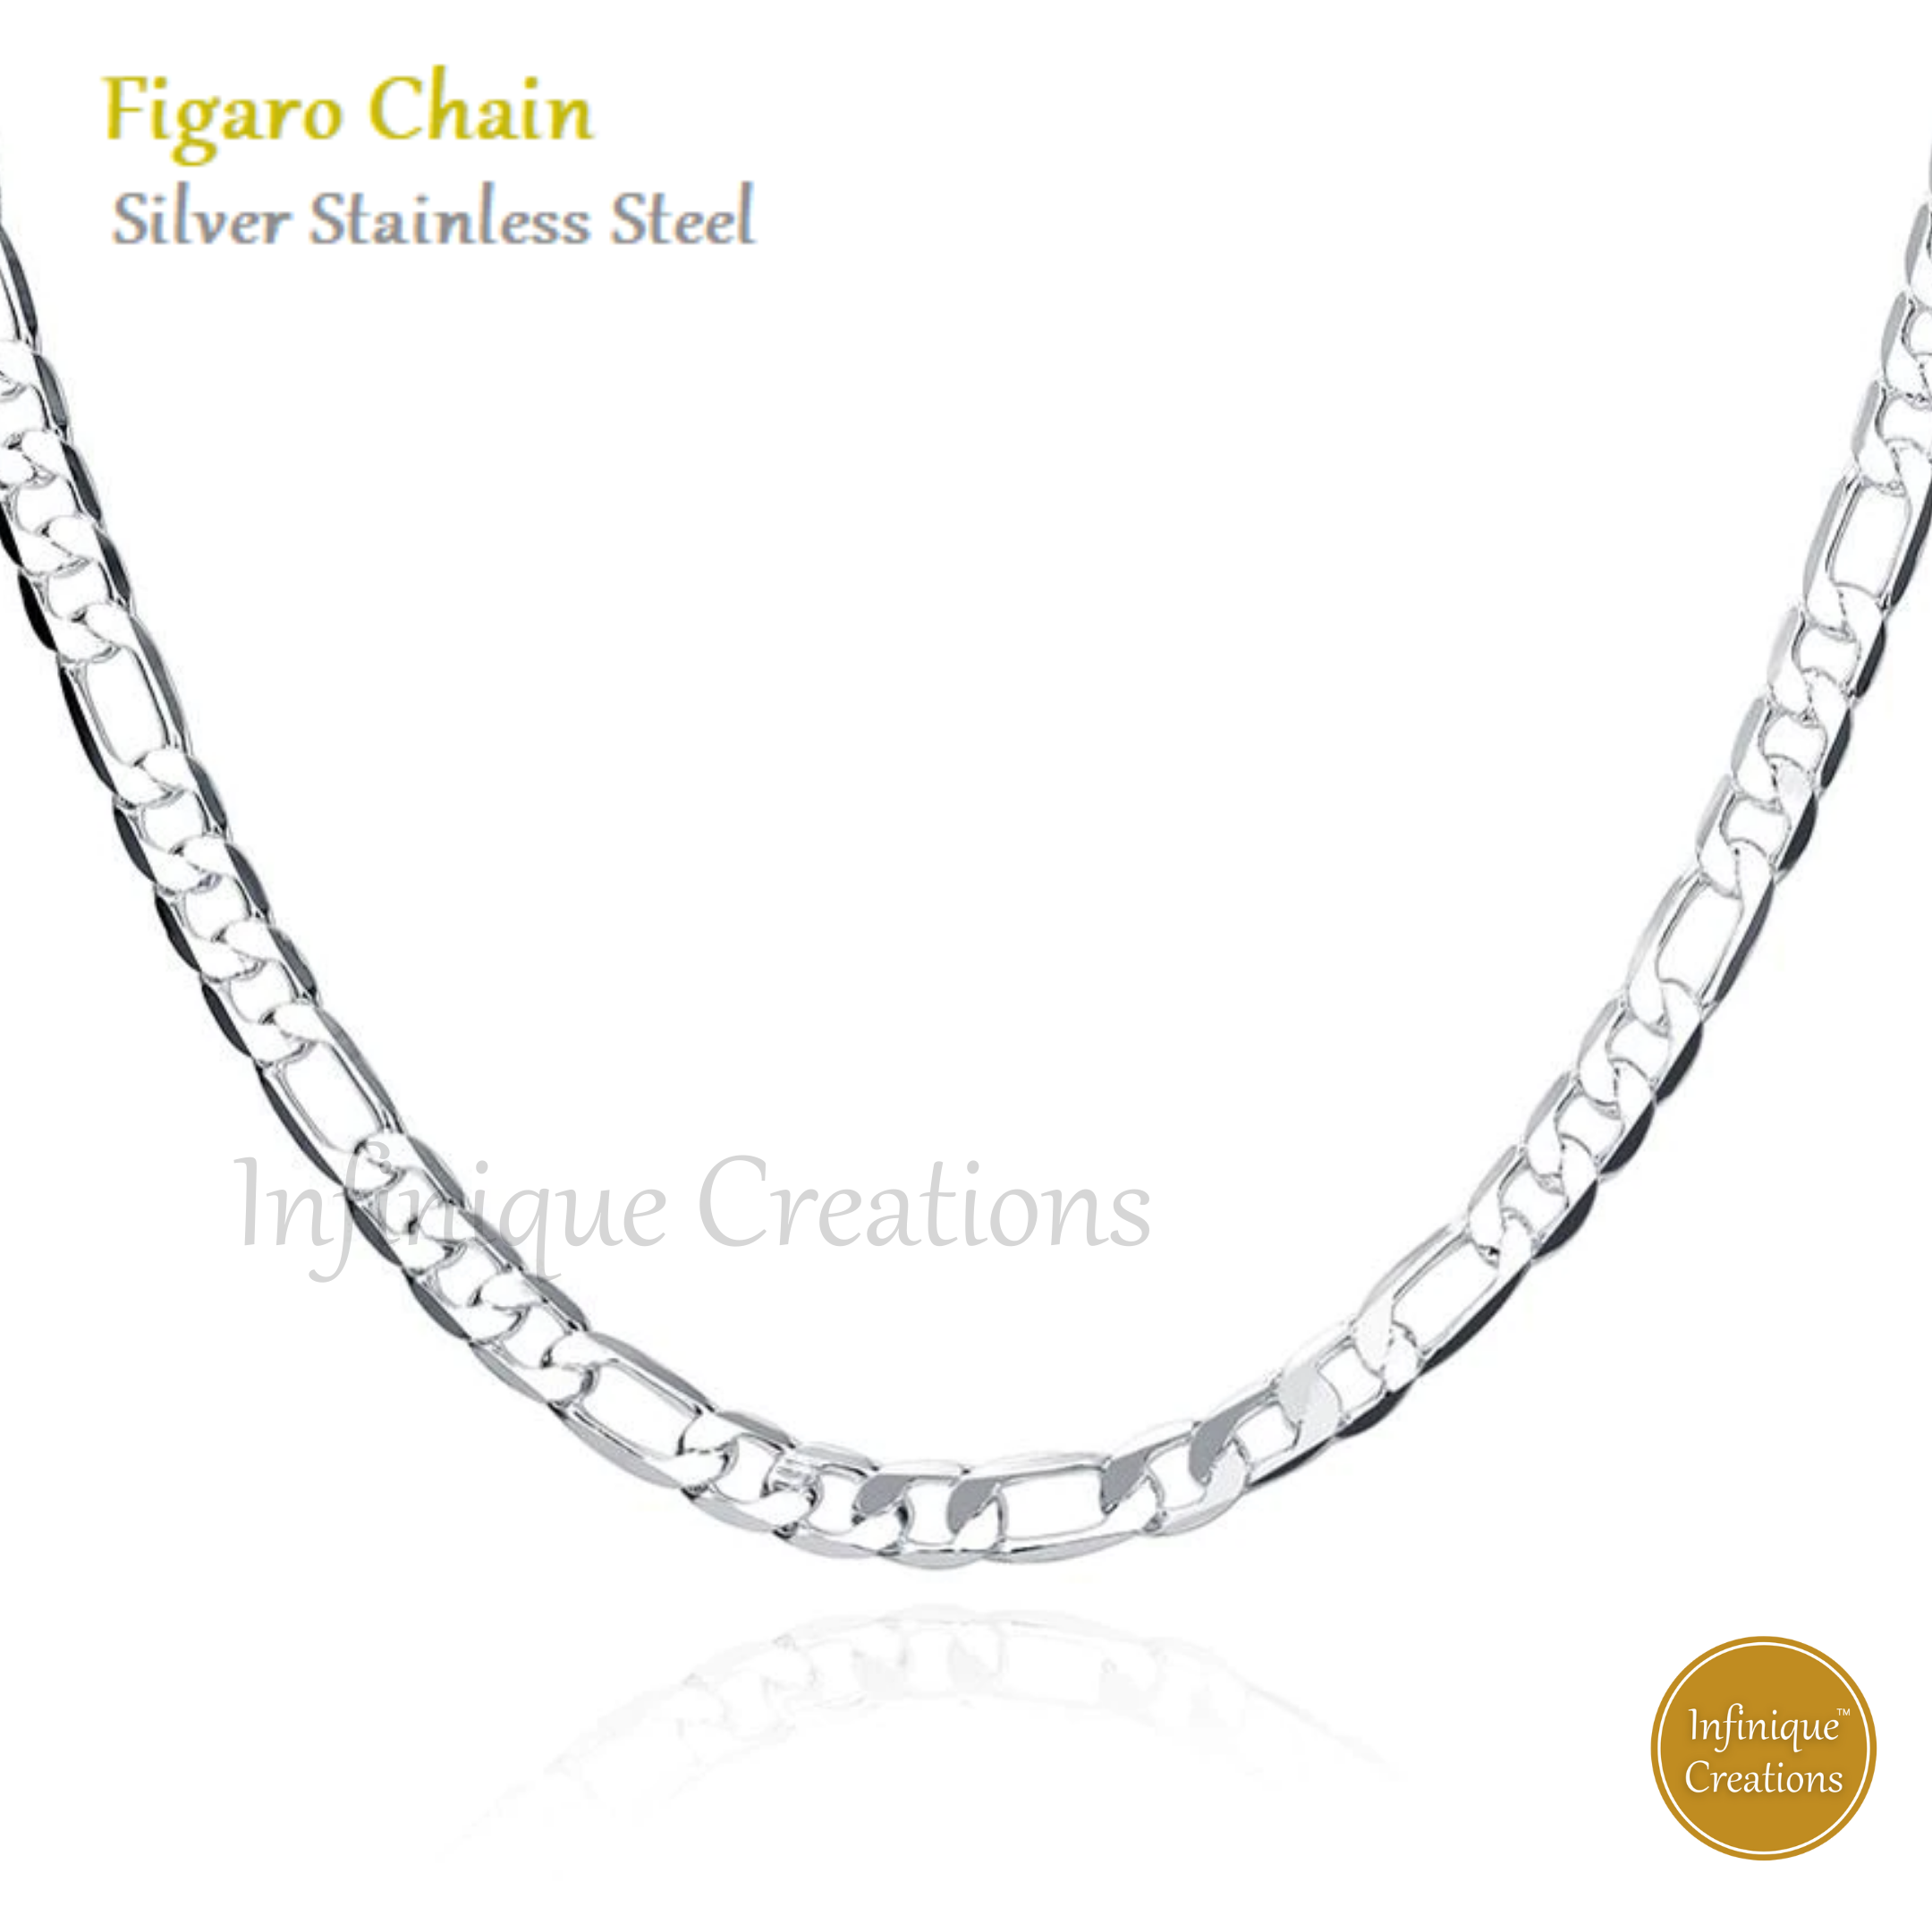 Infinique Creations - 18K Gold Plated Stainless Steel Figaro Chain Bracelet Necklace